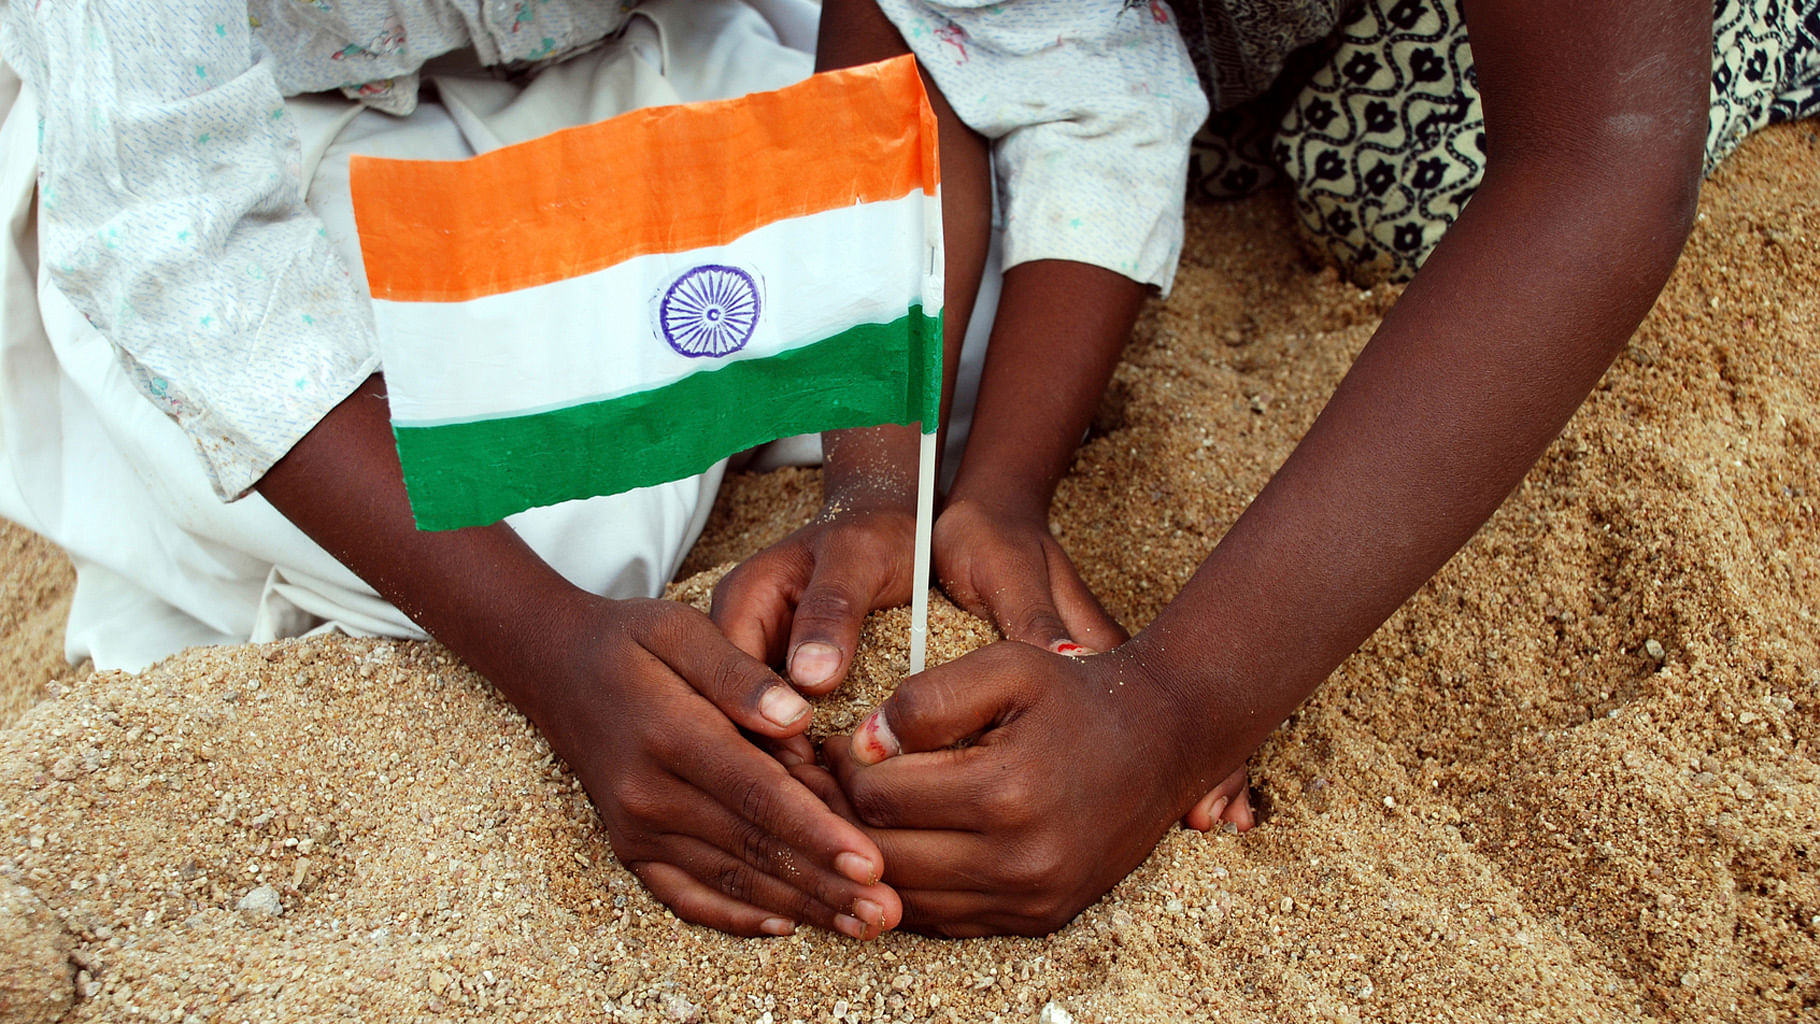 Amid India’s myriad problems, it is democracy that has given Indians of every imaginable caste, creed, culture, and cause the chance to break free of their lot. (Photo: iStockphoto)